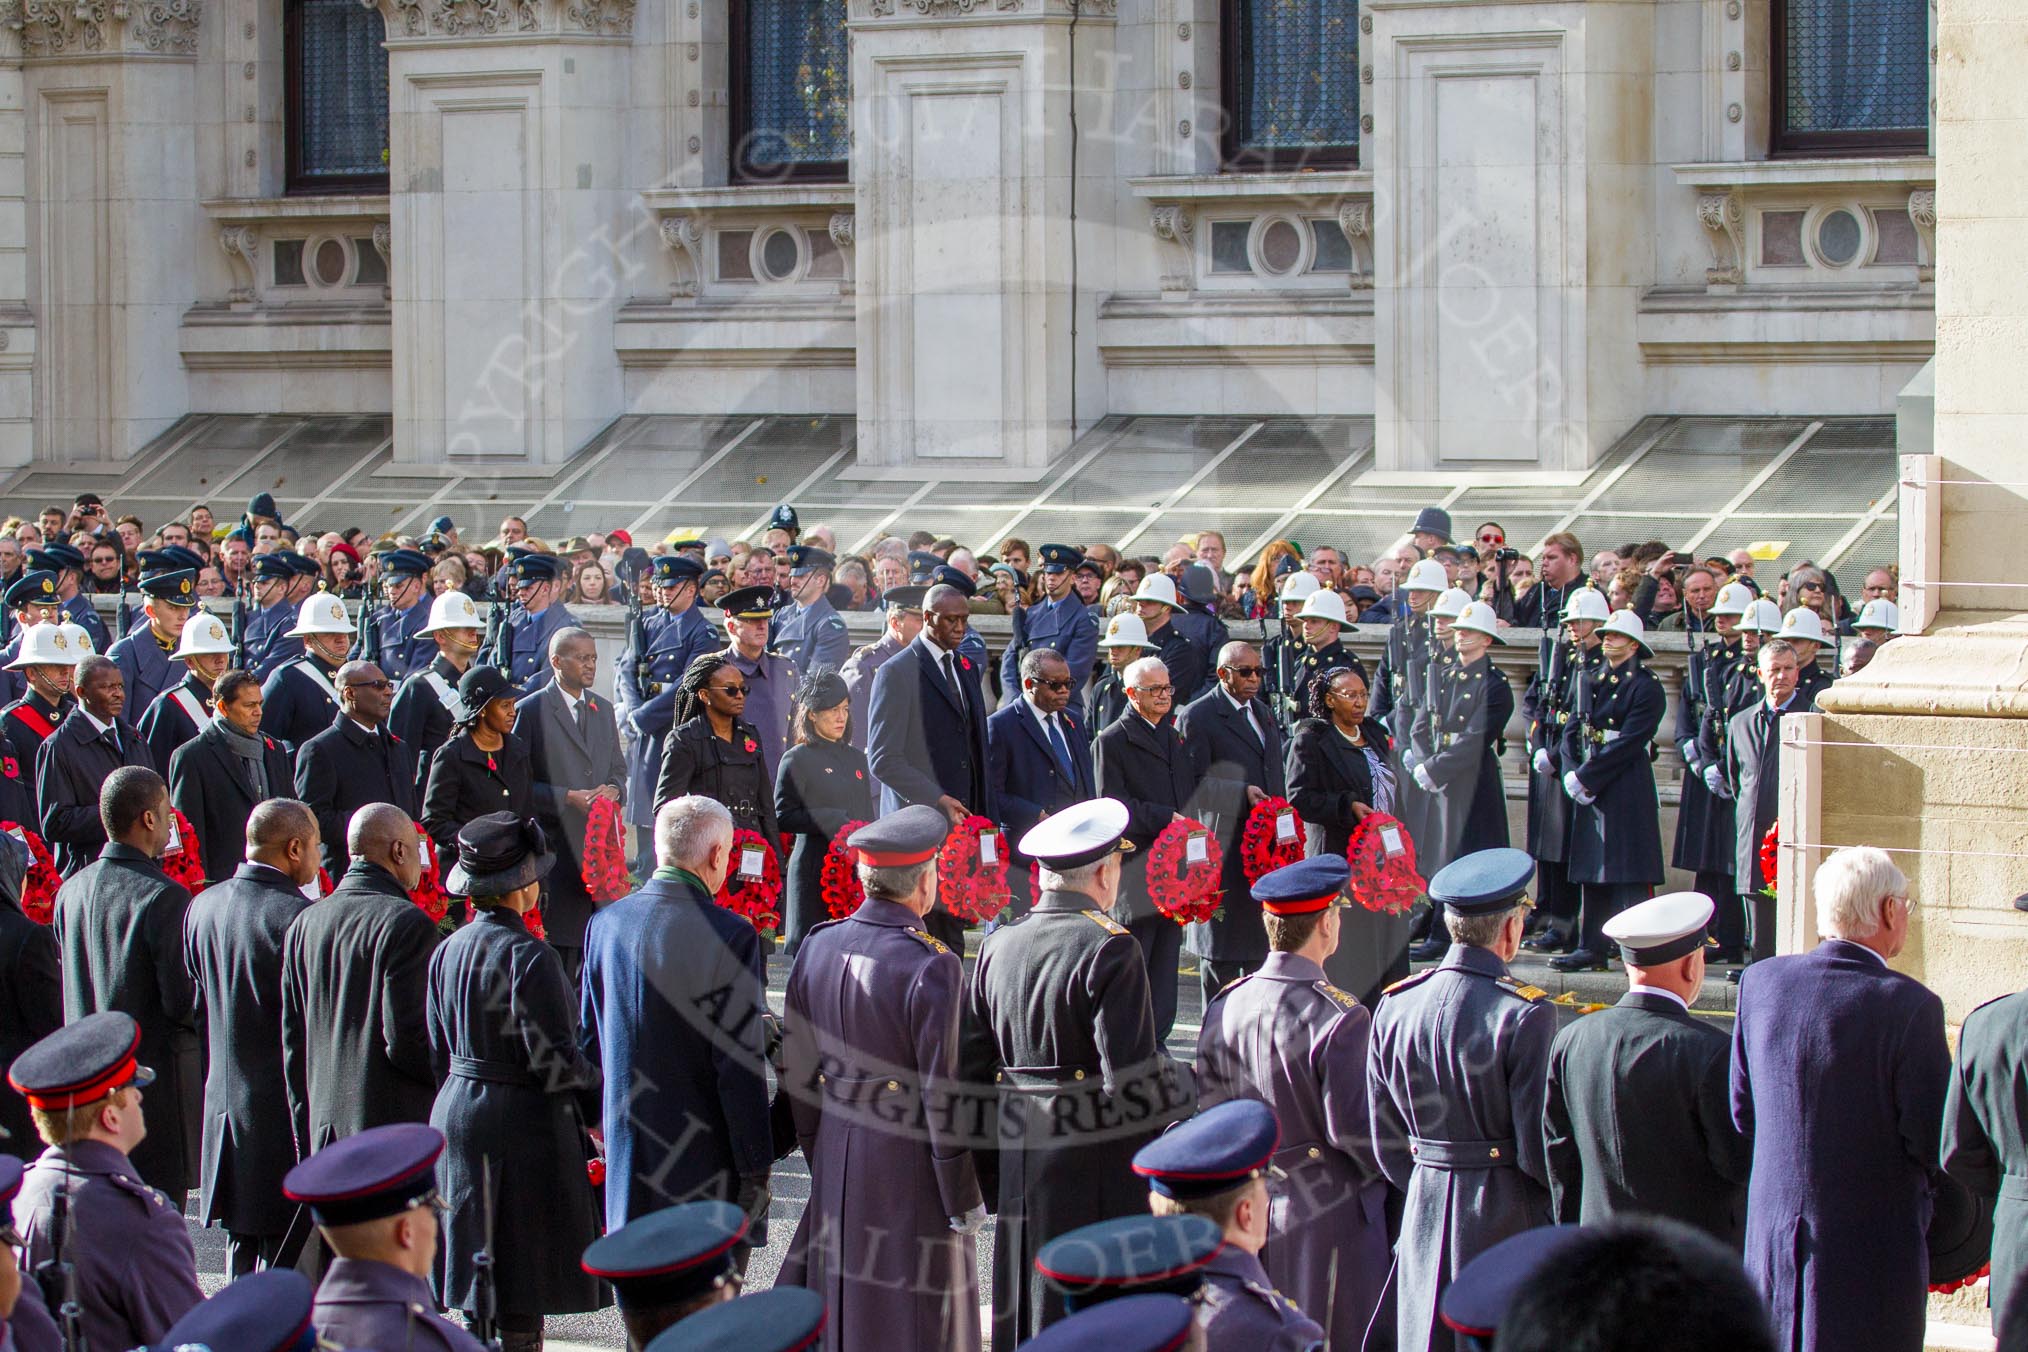 Whitehall, with the High Commissioners around the Cenotaph, during the Remembrance Sunday Cenotaph Ceremony 2018 at Horse Guards Parade, Westminster, London, 11 November 2018, 11:12.